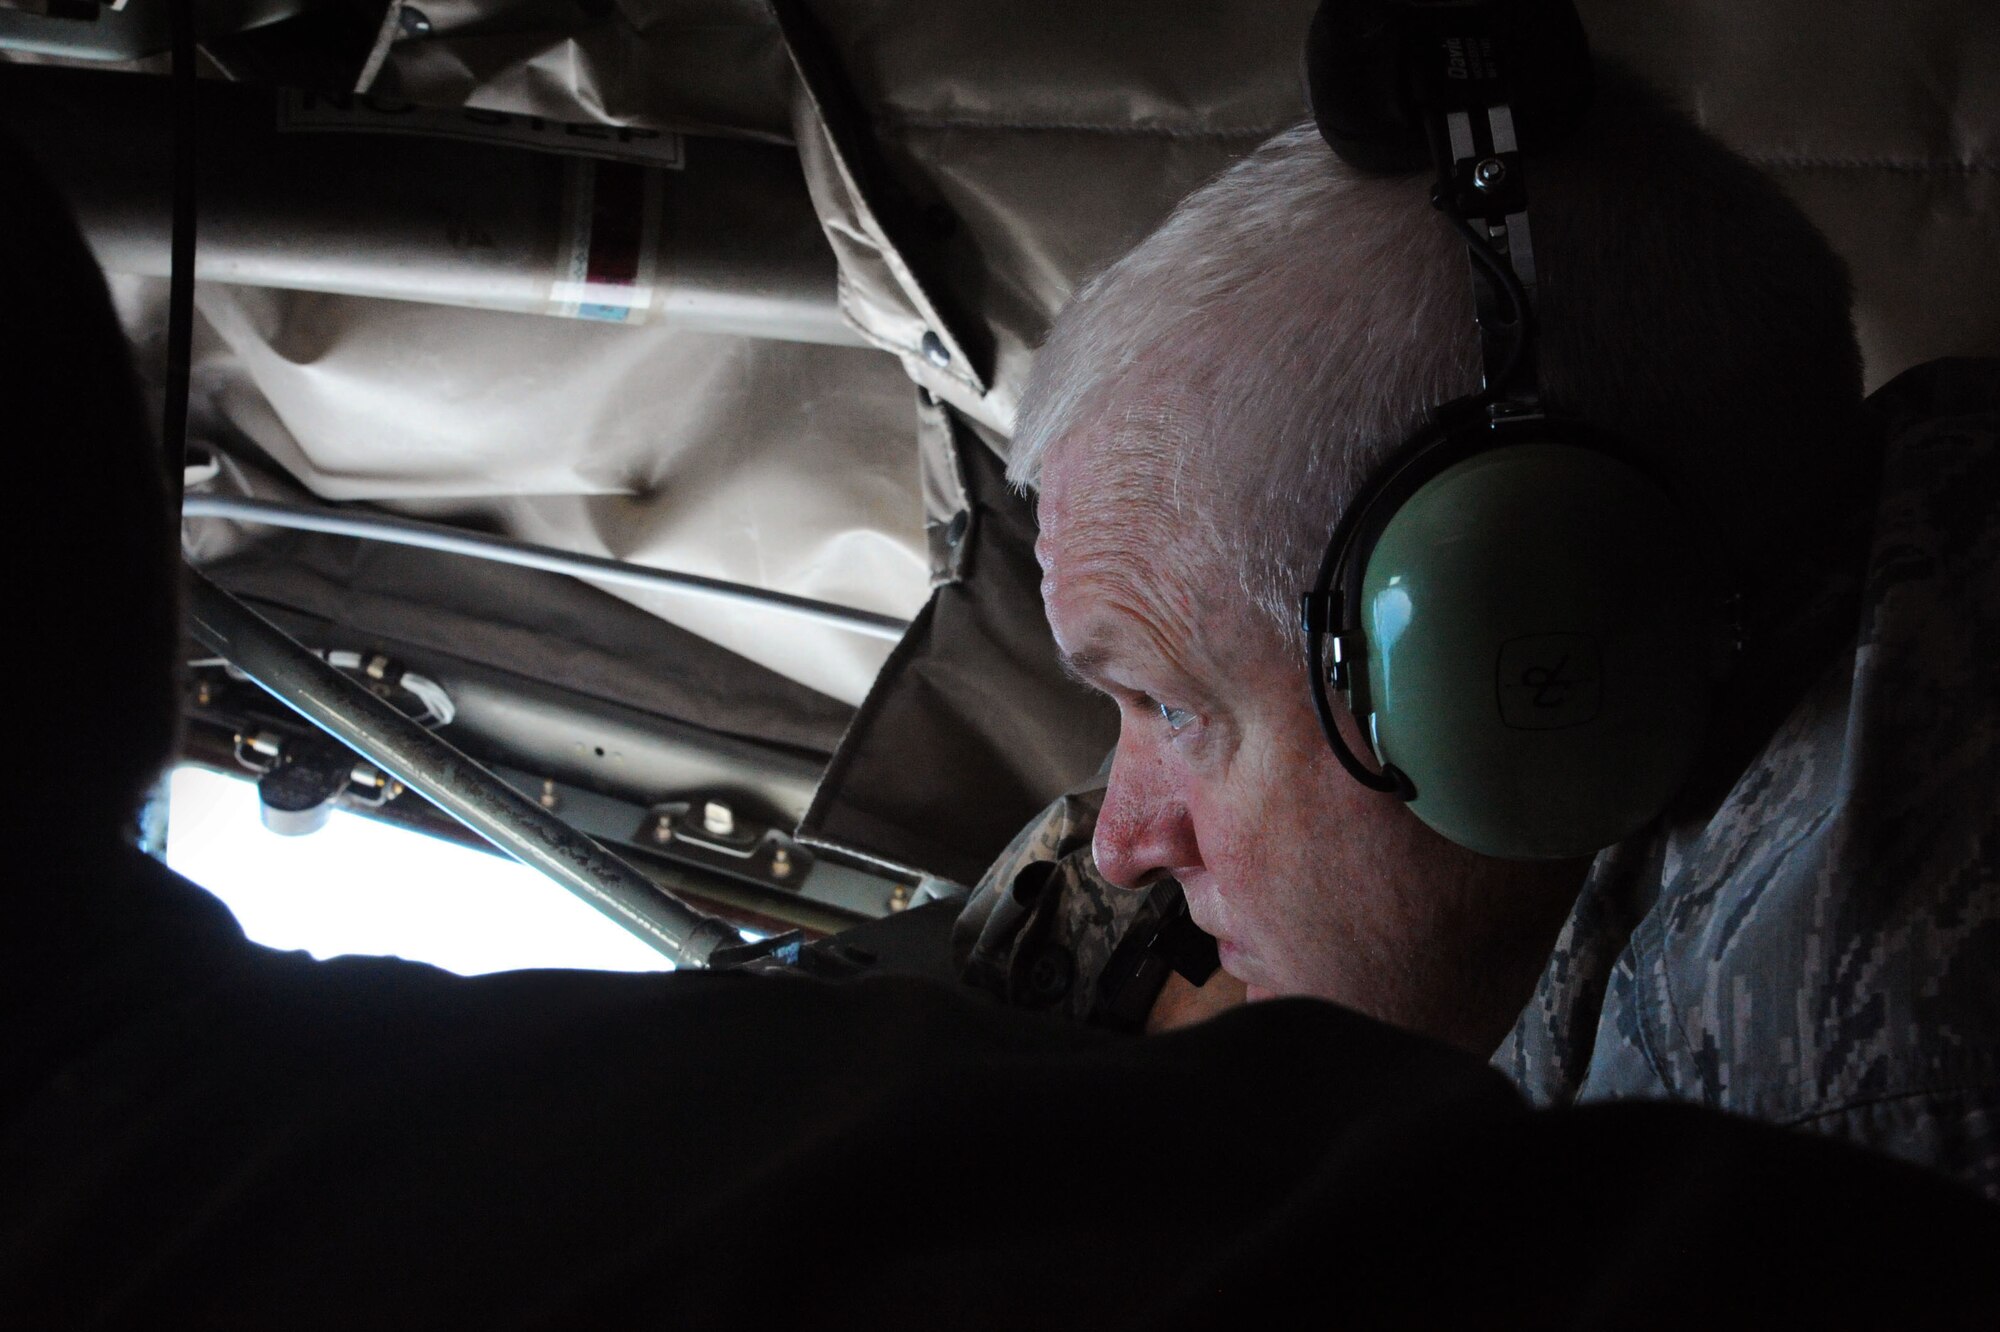 U.S. Air Force Maj. Gen. Scott Rice, Adjutant General, Massachusetts National Guard, watches the refueling of a U.S. Air Force F-15C Eagle fighter aircraft from the boom pod of a U.S. Air Force KC-135 Stratotanker assigned to the 916th Air Refueling Wing, Air Reserve Command, Seymour Johnson, N.C., April 9, 2016. The Airmen deployed to Iceland in support of Icelandic Air Surveillance operations are a total force structure combining efforts to maintain a global presence in Europe. (U.S. Air Force photo by Master Sgt. Kevin Nichols/Released)